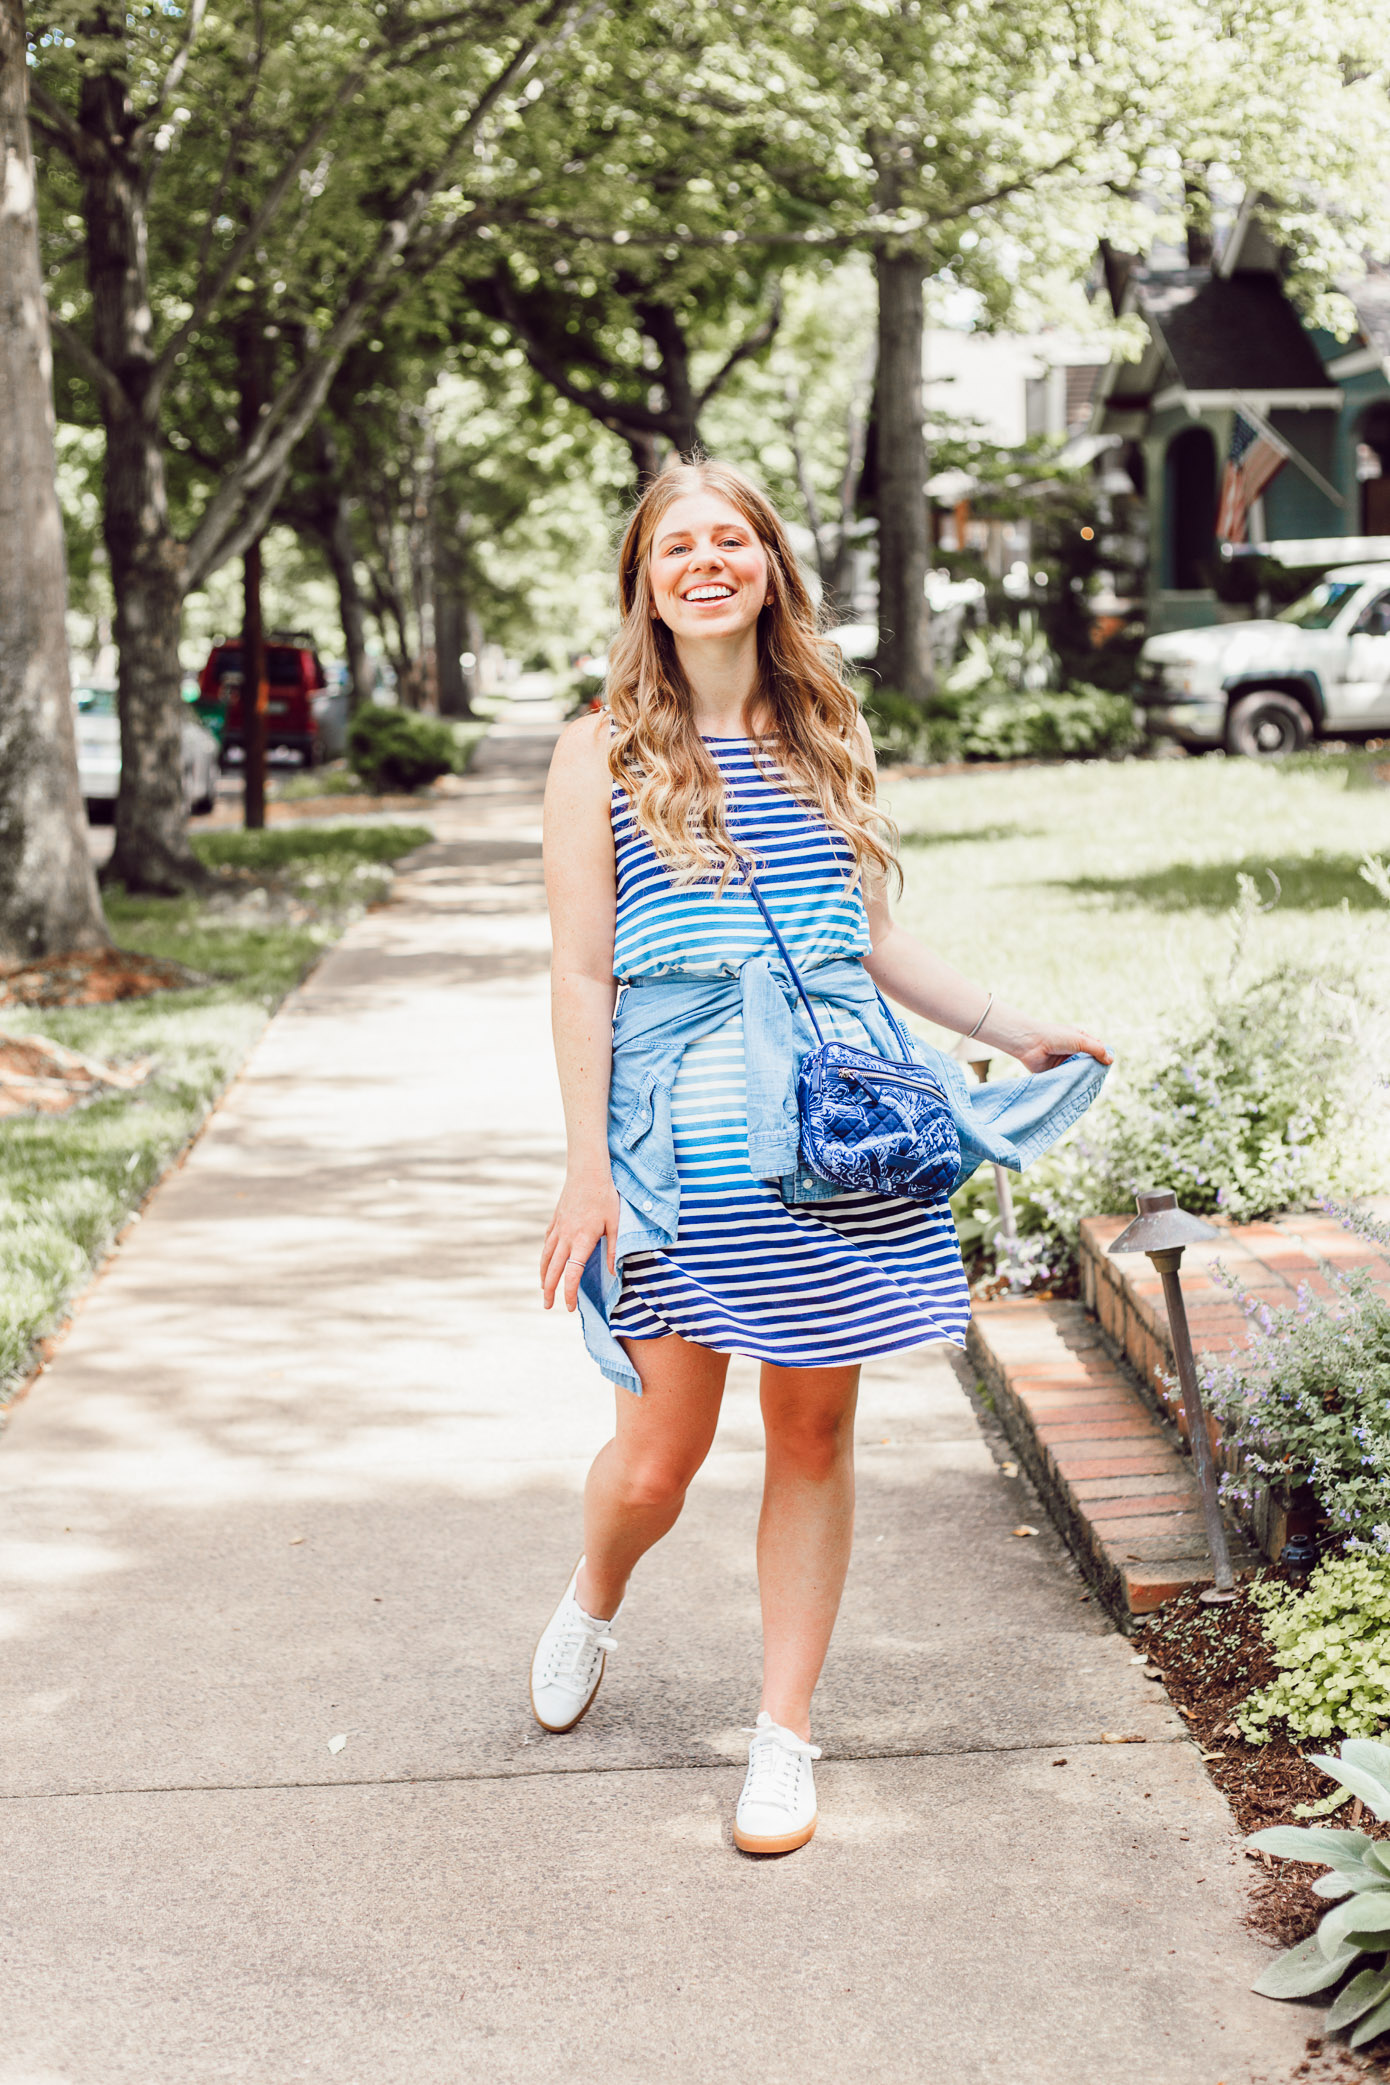 Summer Travel Packing Tips | Casual Summer Travel Outfit Idea | Louella Reese Life & Style Blog